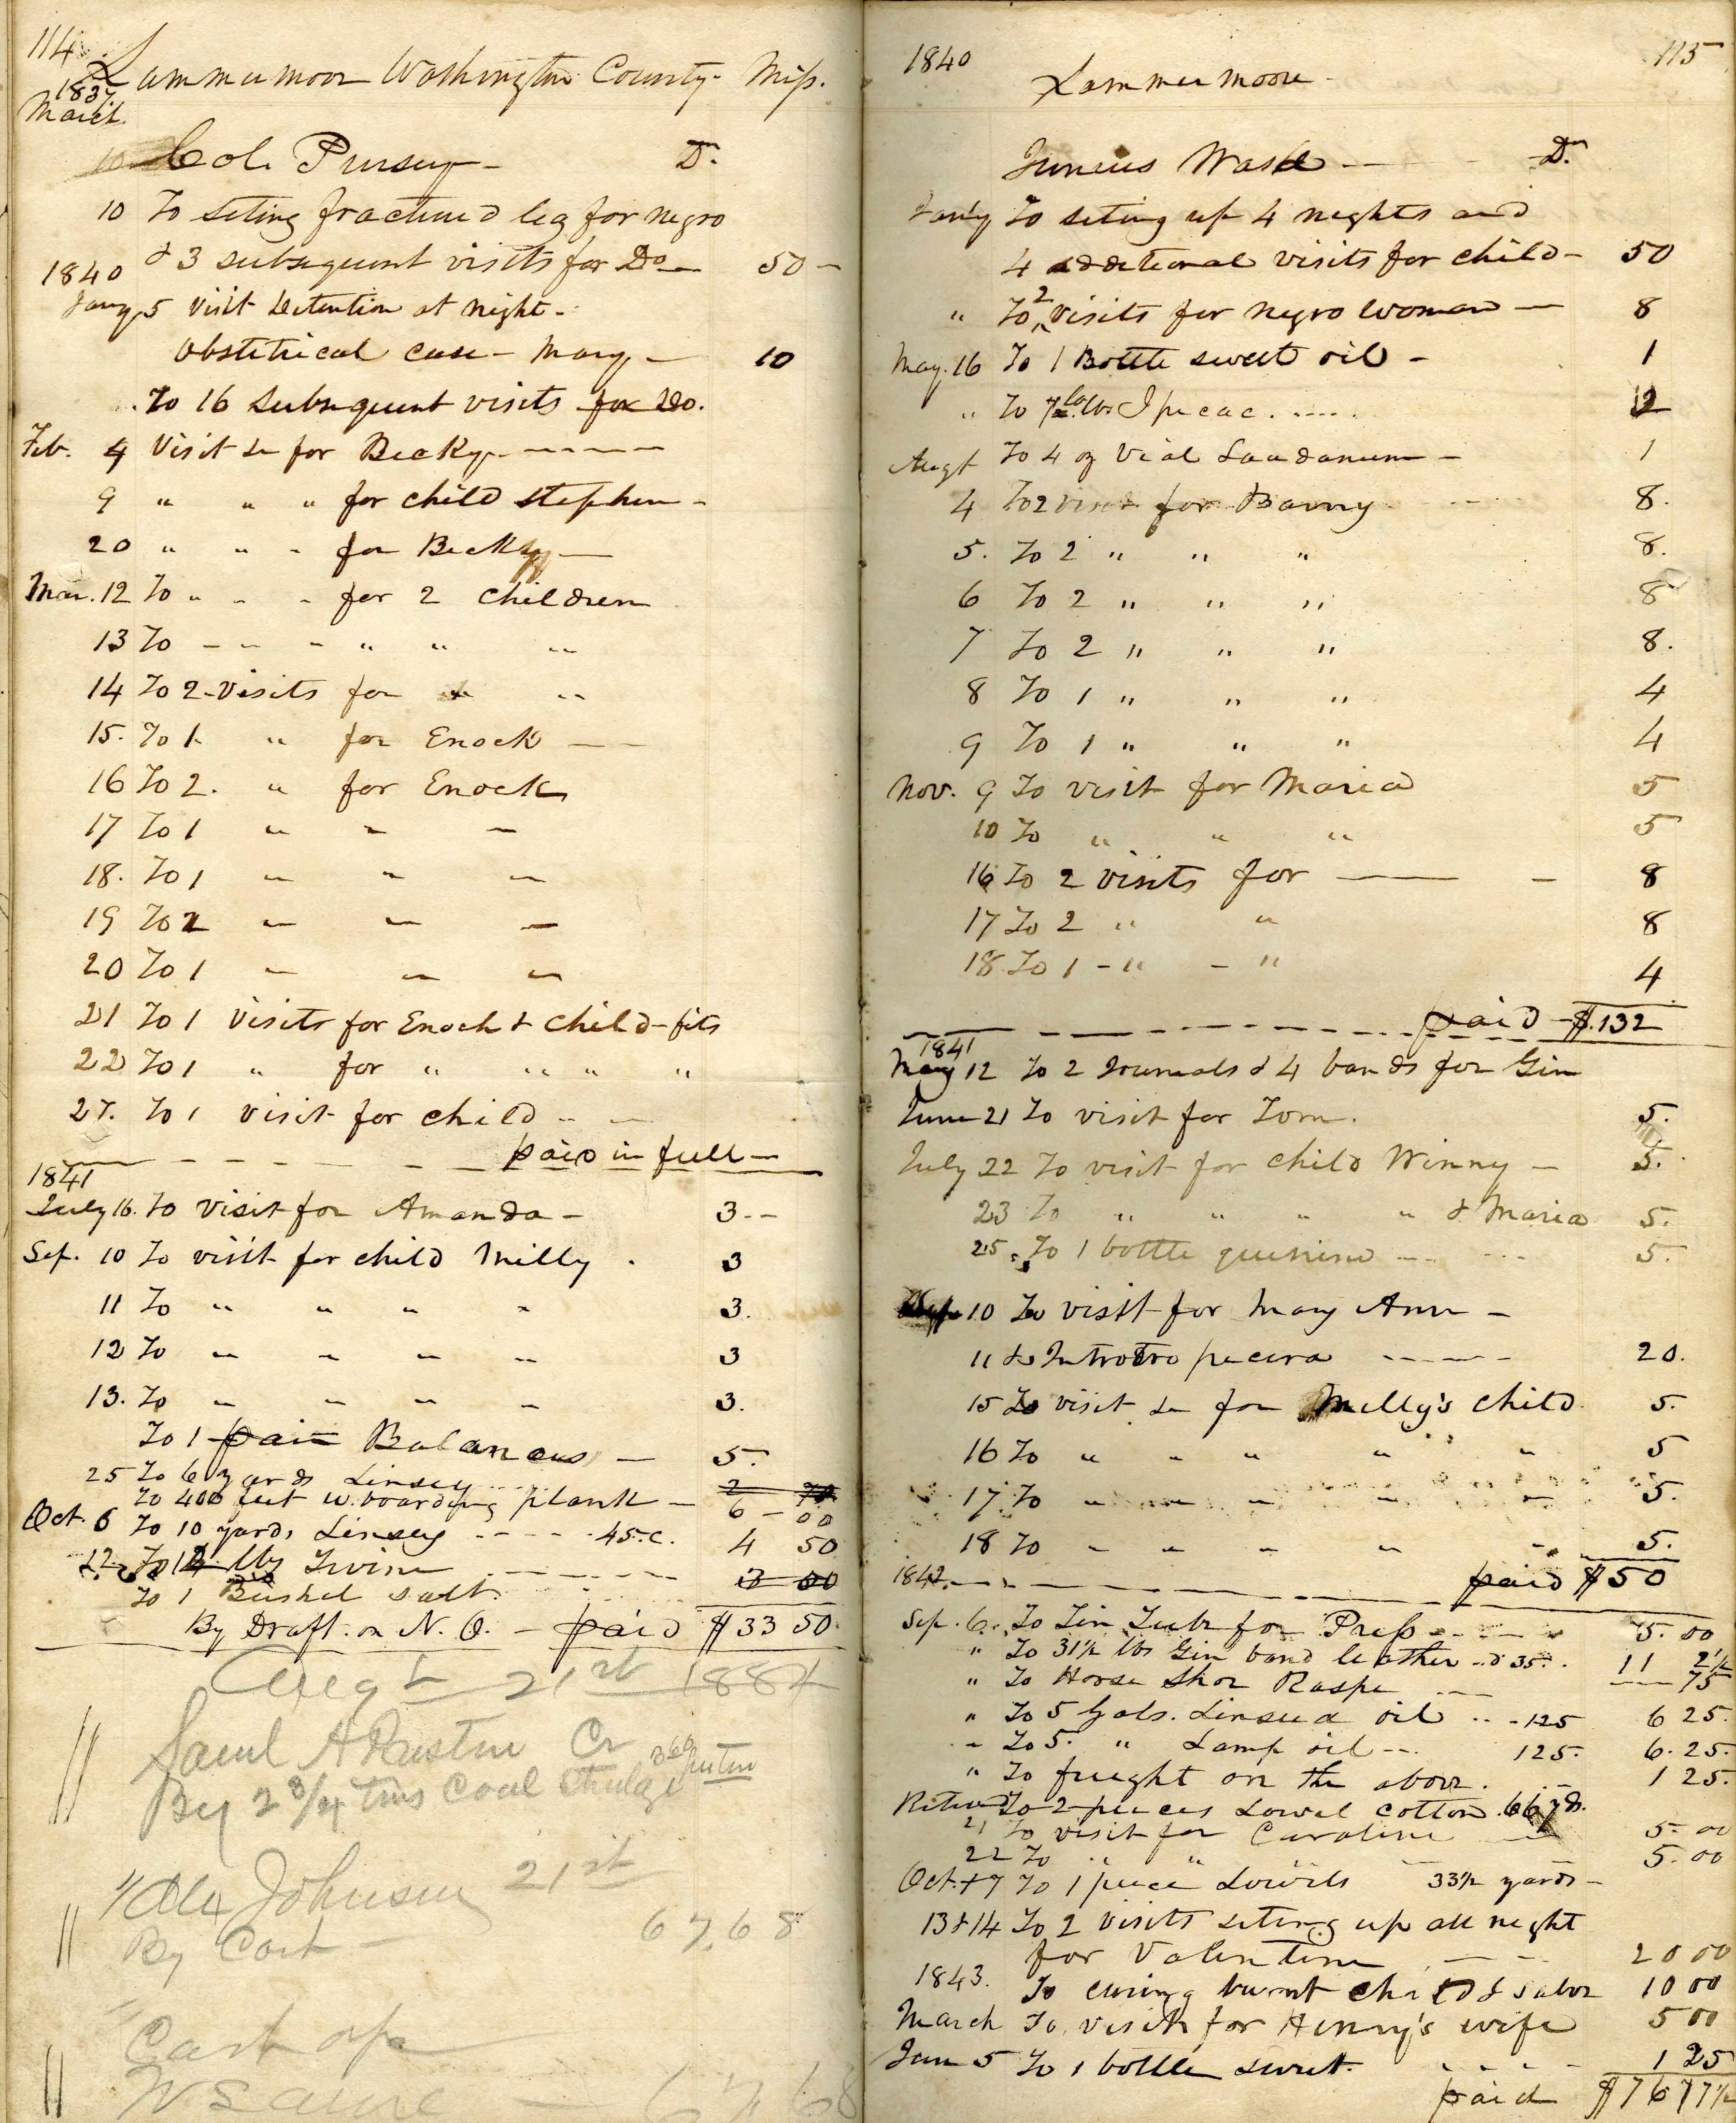 A sample page from William Hammet's medical practice account book. The first entry, from March 10, 1837, reads, "Col. Pursey To seting [sic] fractured leg for negro + 3 subsequent visits for [ditto] [$]50--." The larger handwriting at bottom left is that of Governor Tyler, who used this and other account books of the Hammets to record his own business transactions some decades later.